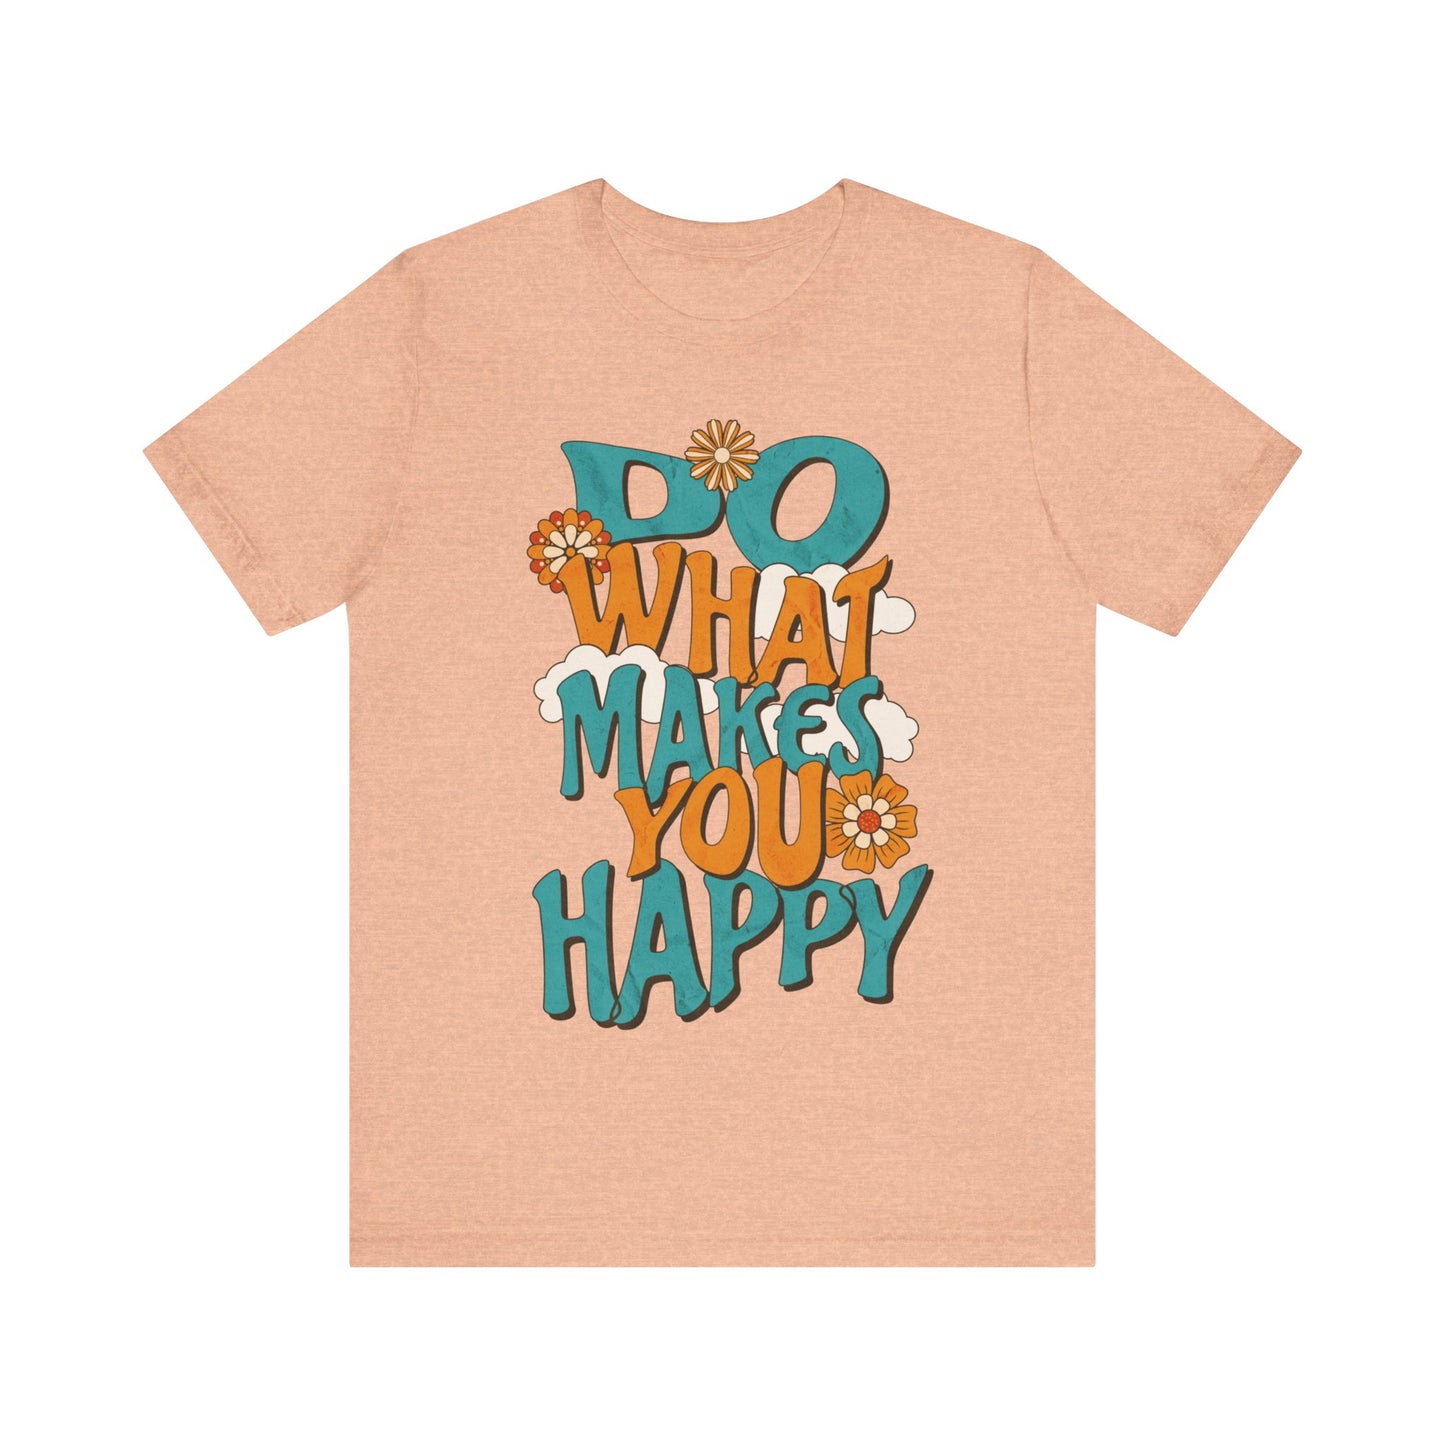 Happy Shirt, Quote t-Shirt, Motivate Tee, Awareness Tee, Do What Makes You Happy t-Shirt, Positive Quote, Happy Hippie Shirt